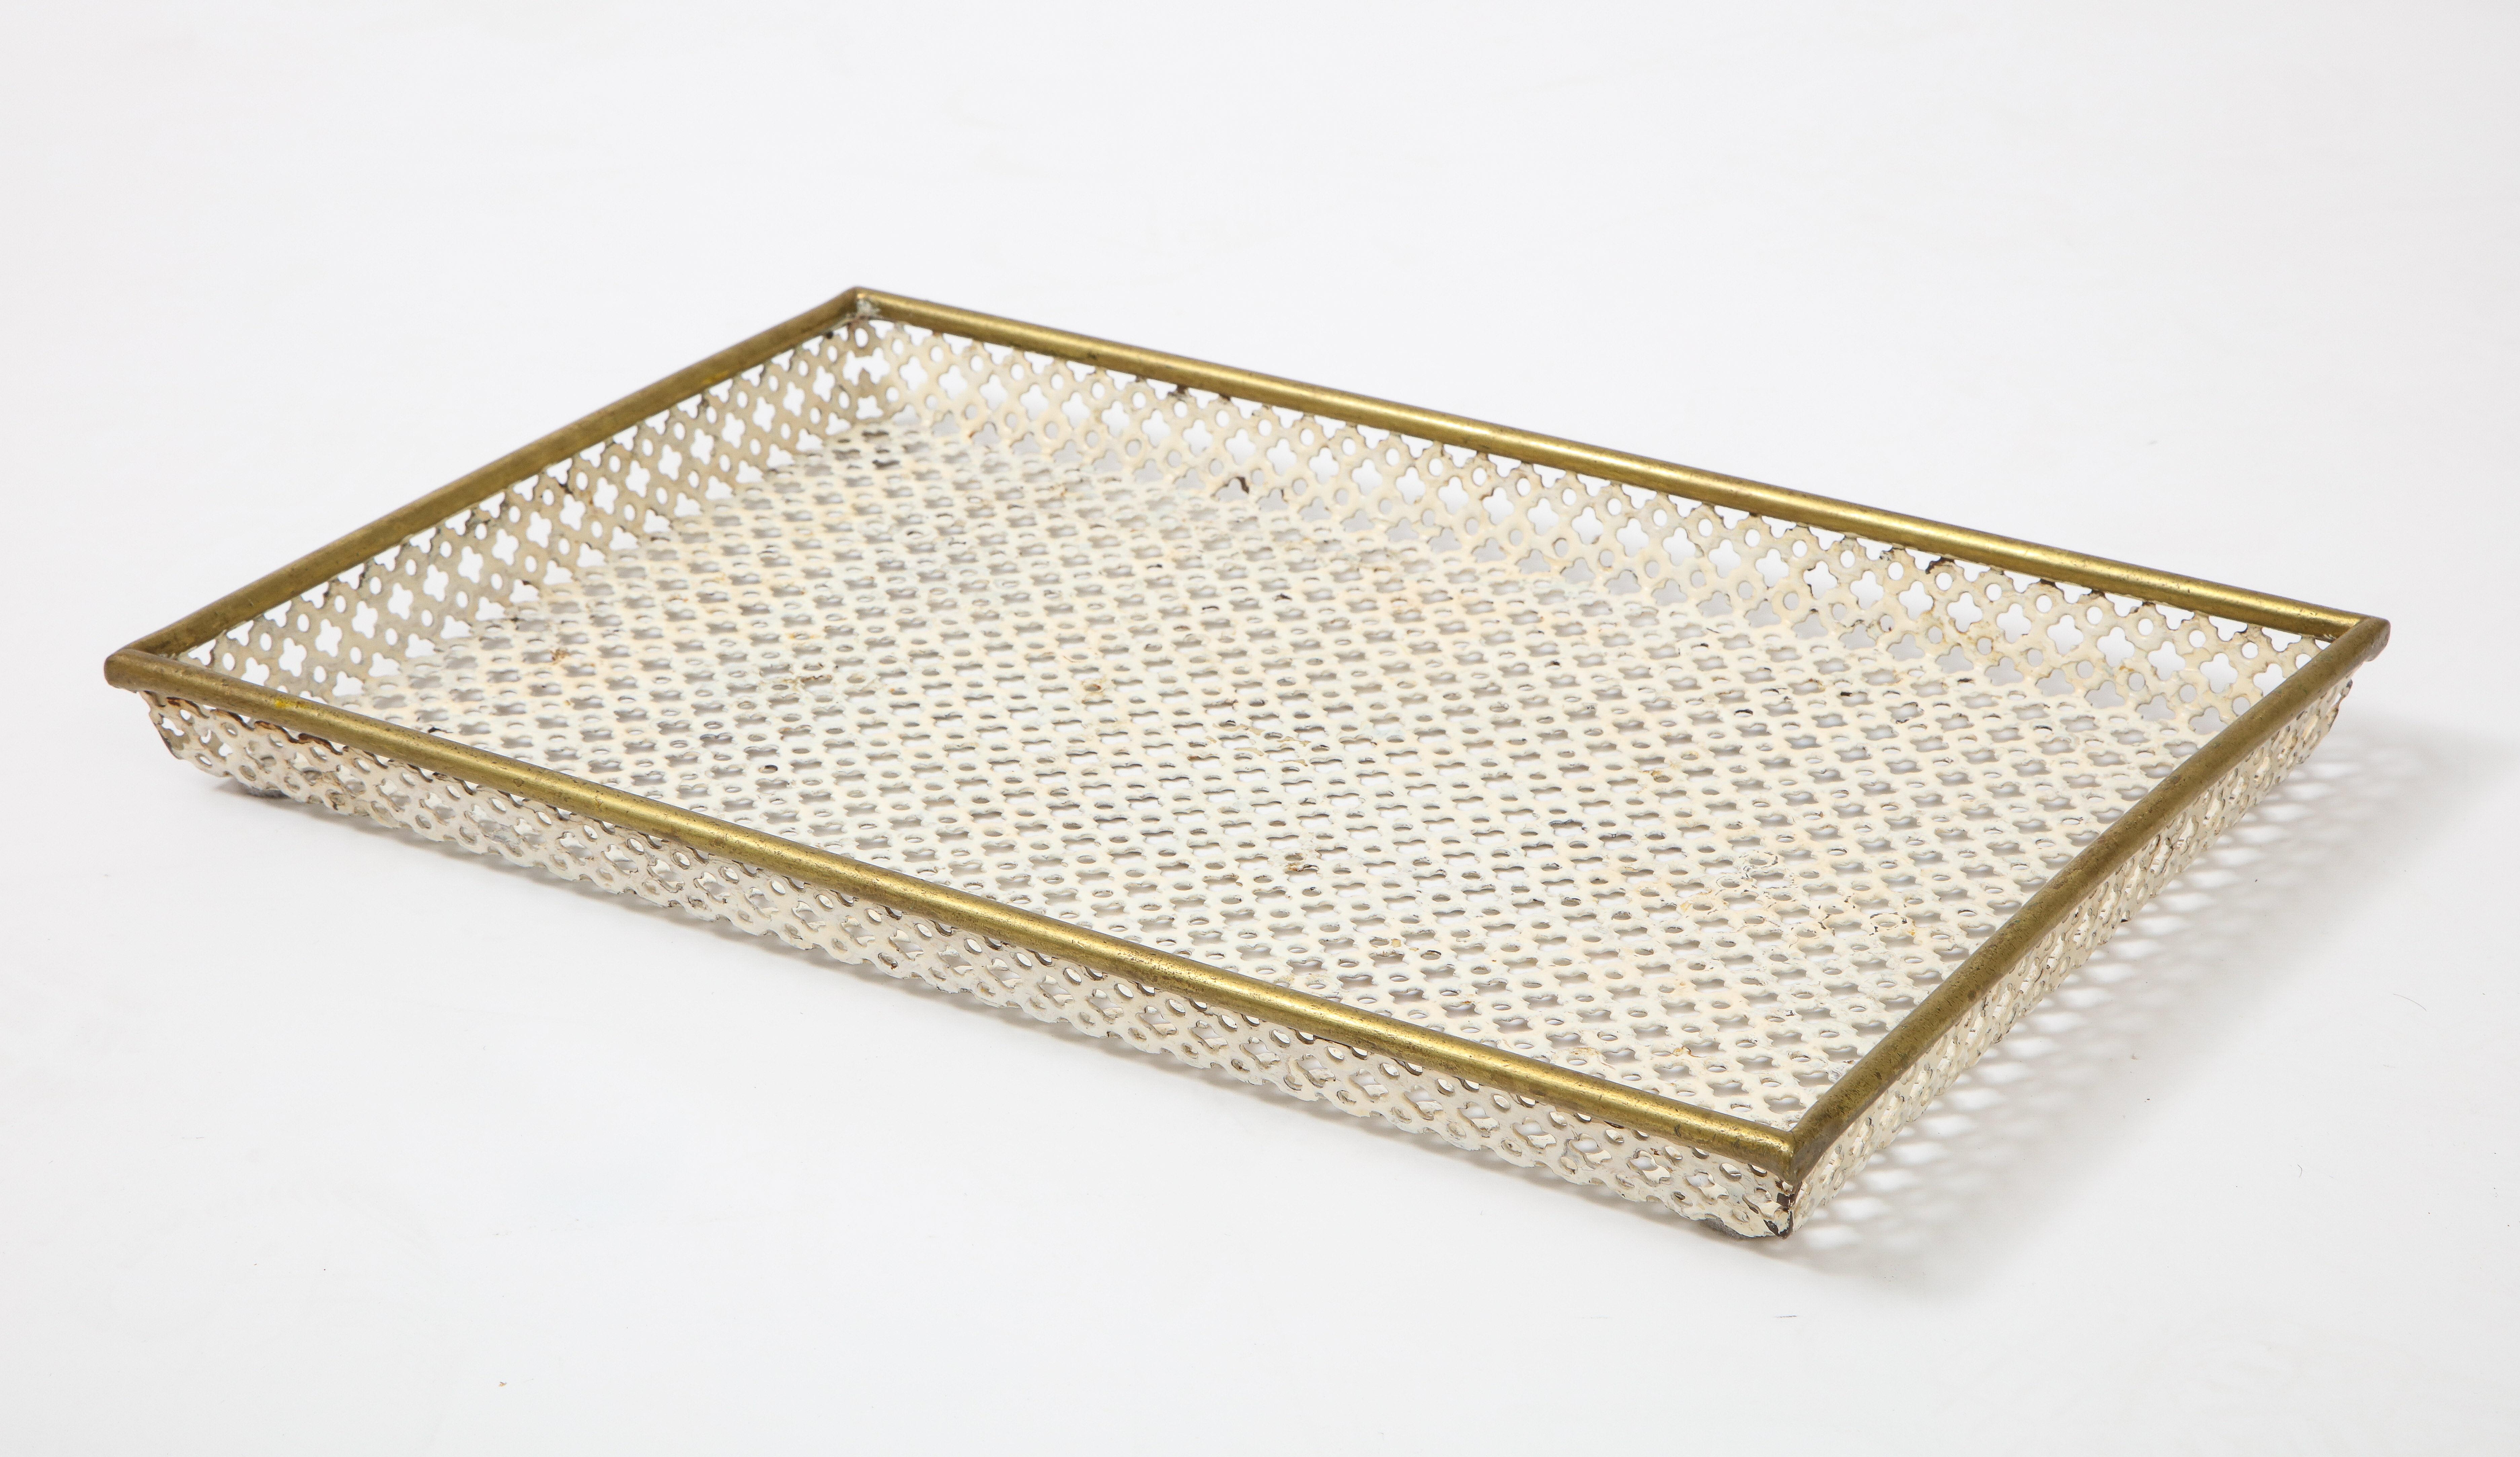 Mathieu Matégot (1910-2001)
White tray, France, circa 1950
Perforated metal, brass rod detail, enamel
Measures: H 1.5, D 11.5, W 17.25 in.

Provenance: Collection of an architect, France

Bibliography: JOUSSE ENTREPRISE, 